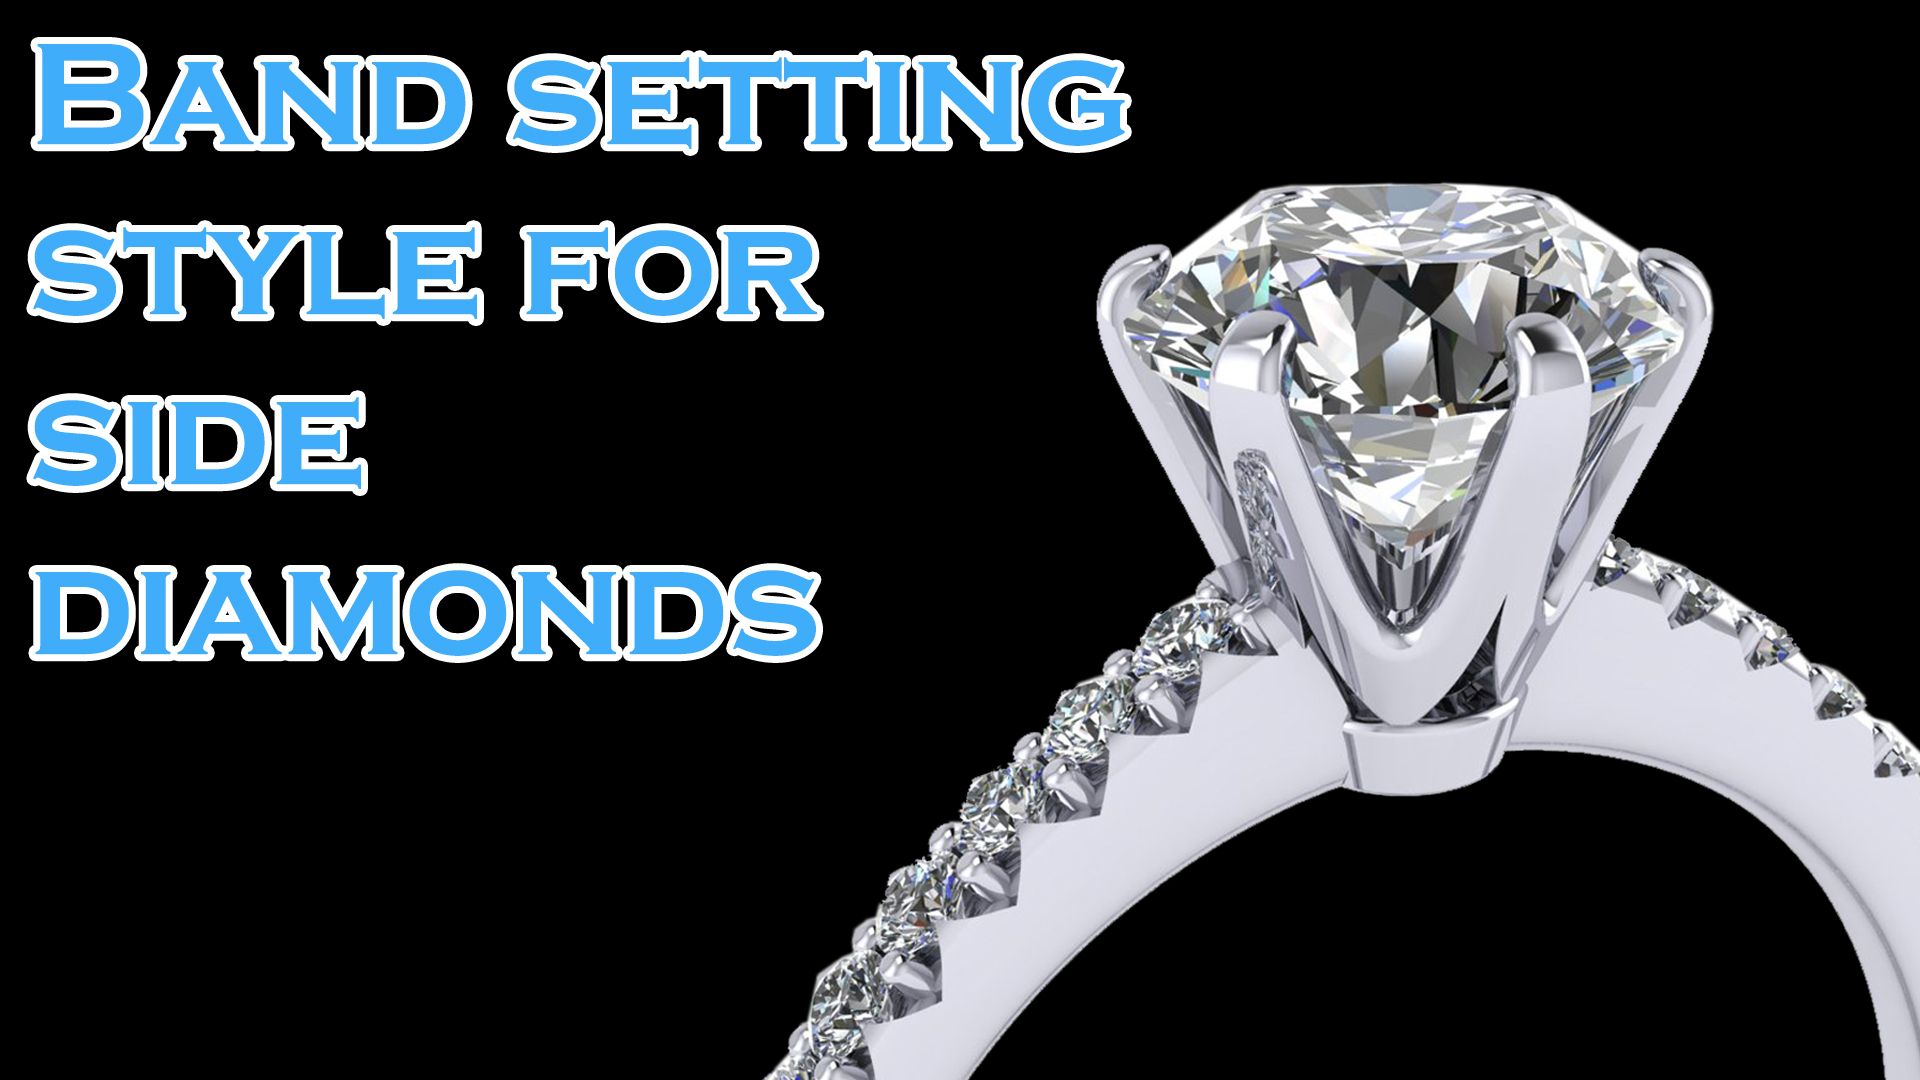 Band Setting Styles for Side Diamonds - Pave, Channel, Channel Pave, Shared Prongs, Bezel 